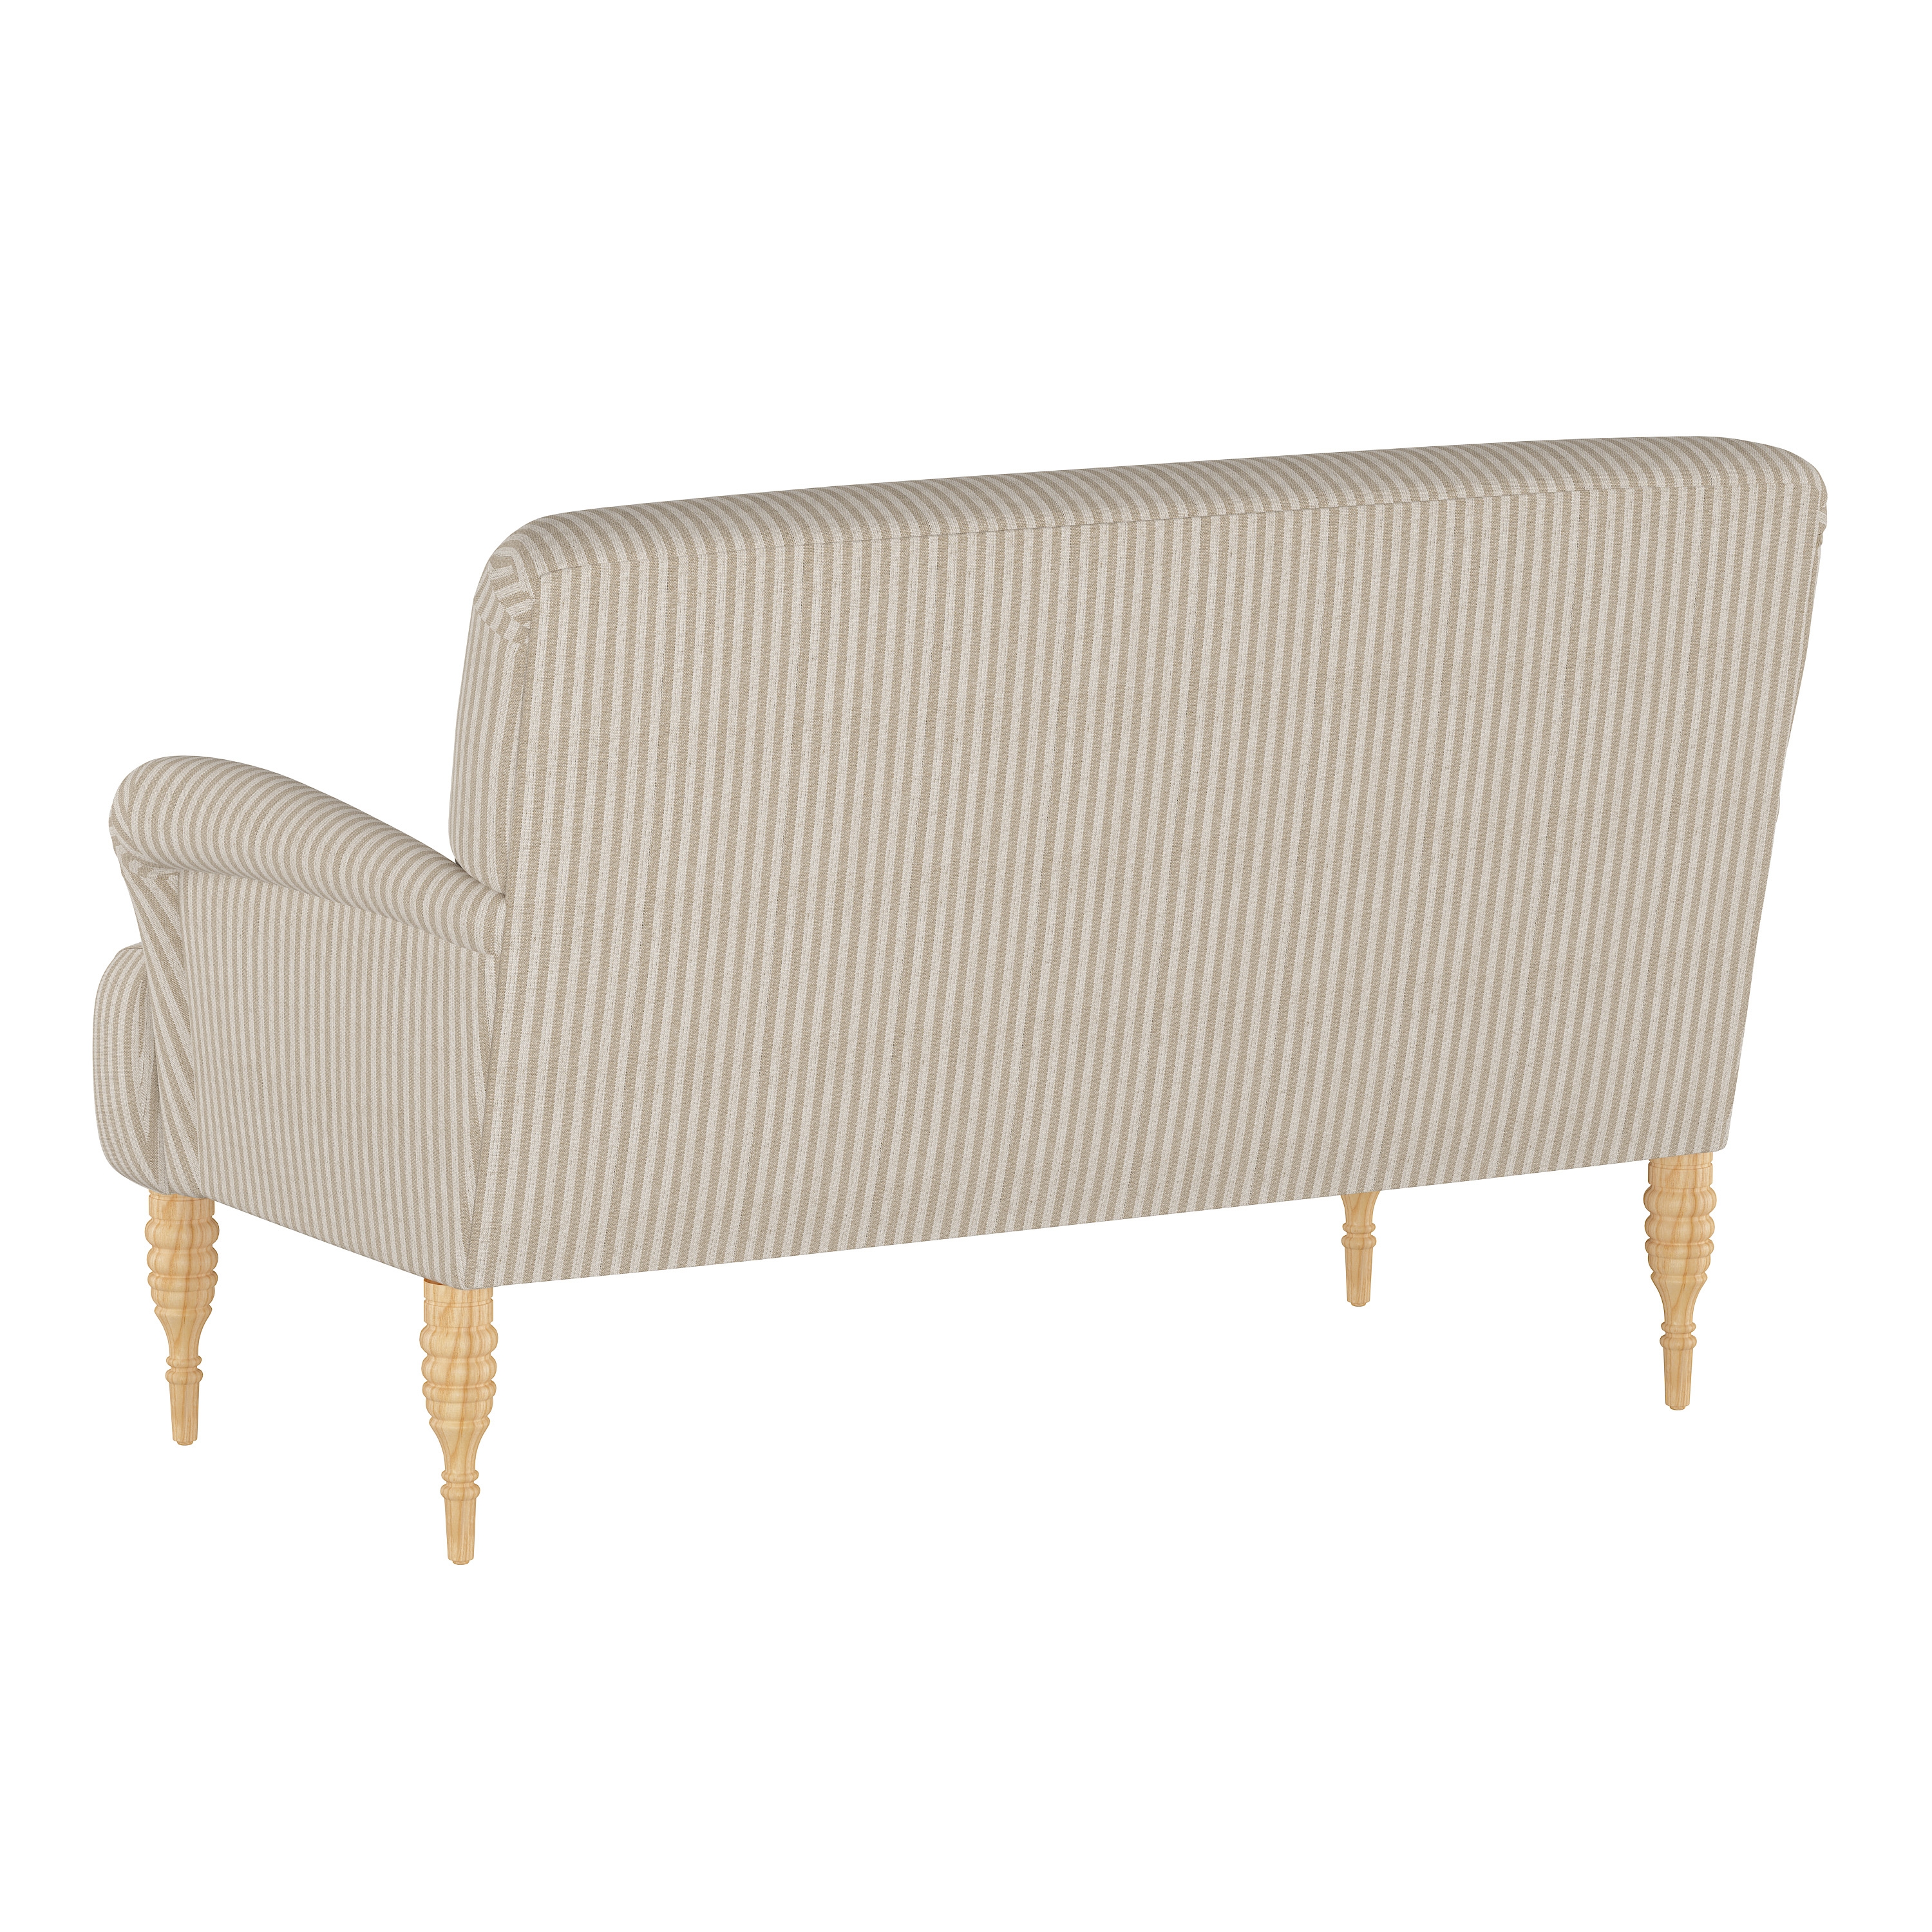 Nicola Settee in Scout Stripe Taupe - Image 3